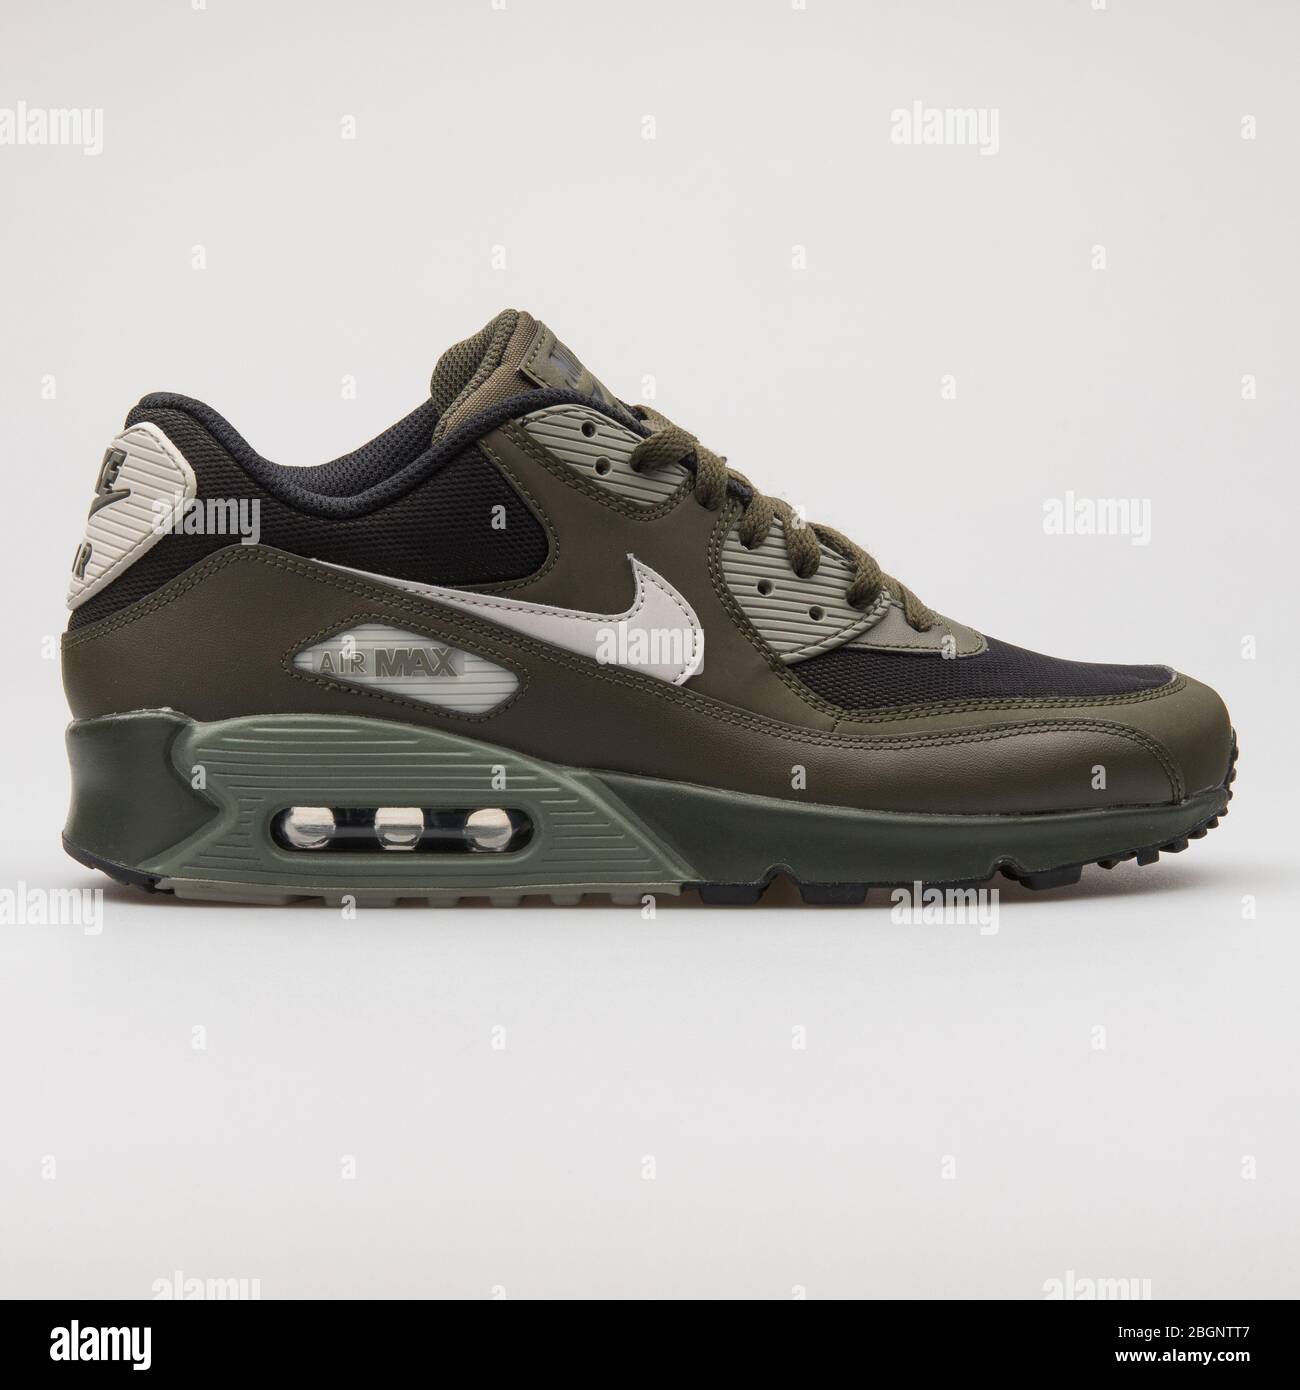 olive green and black air max 90